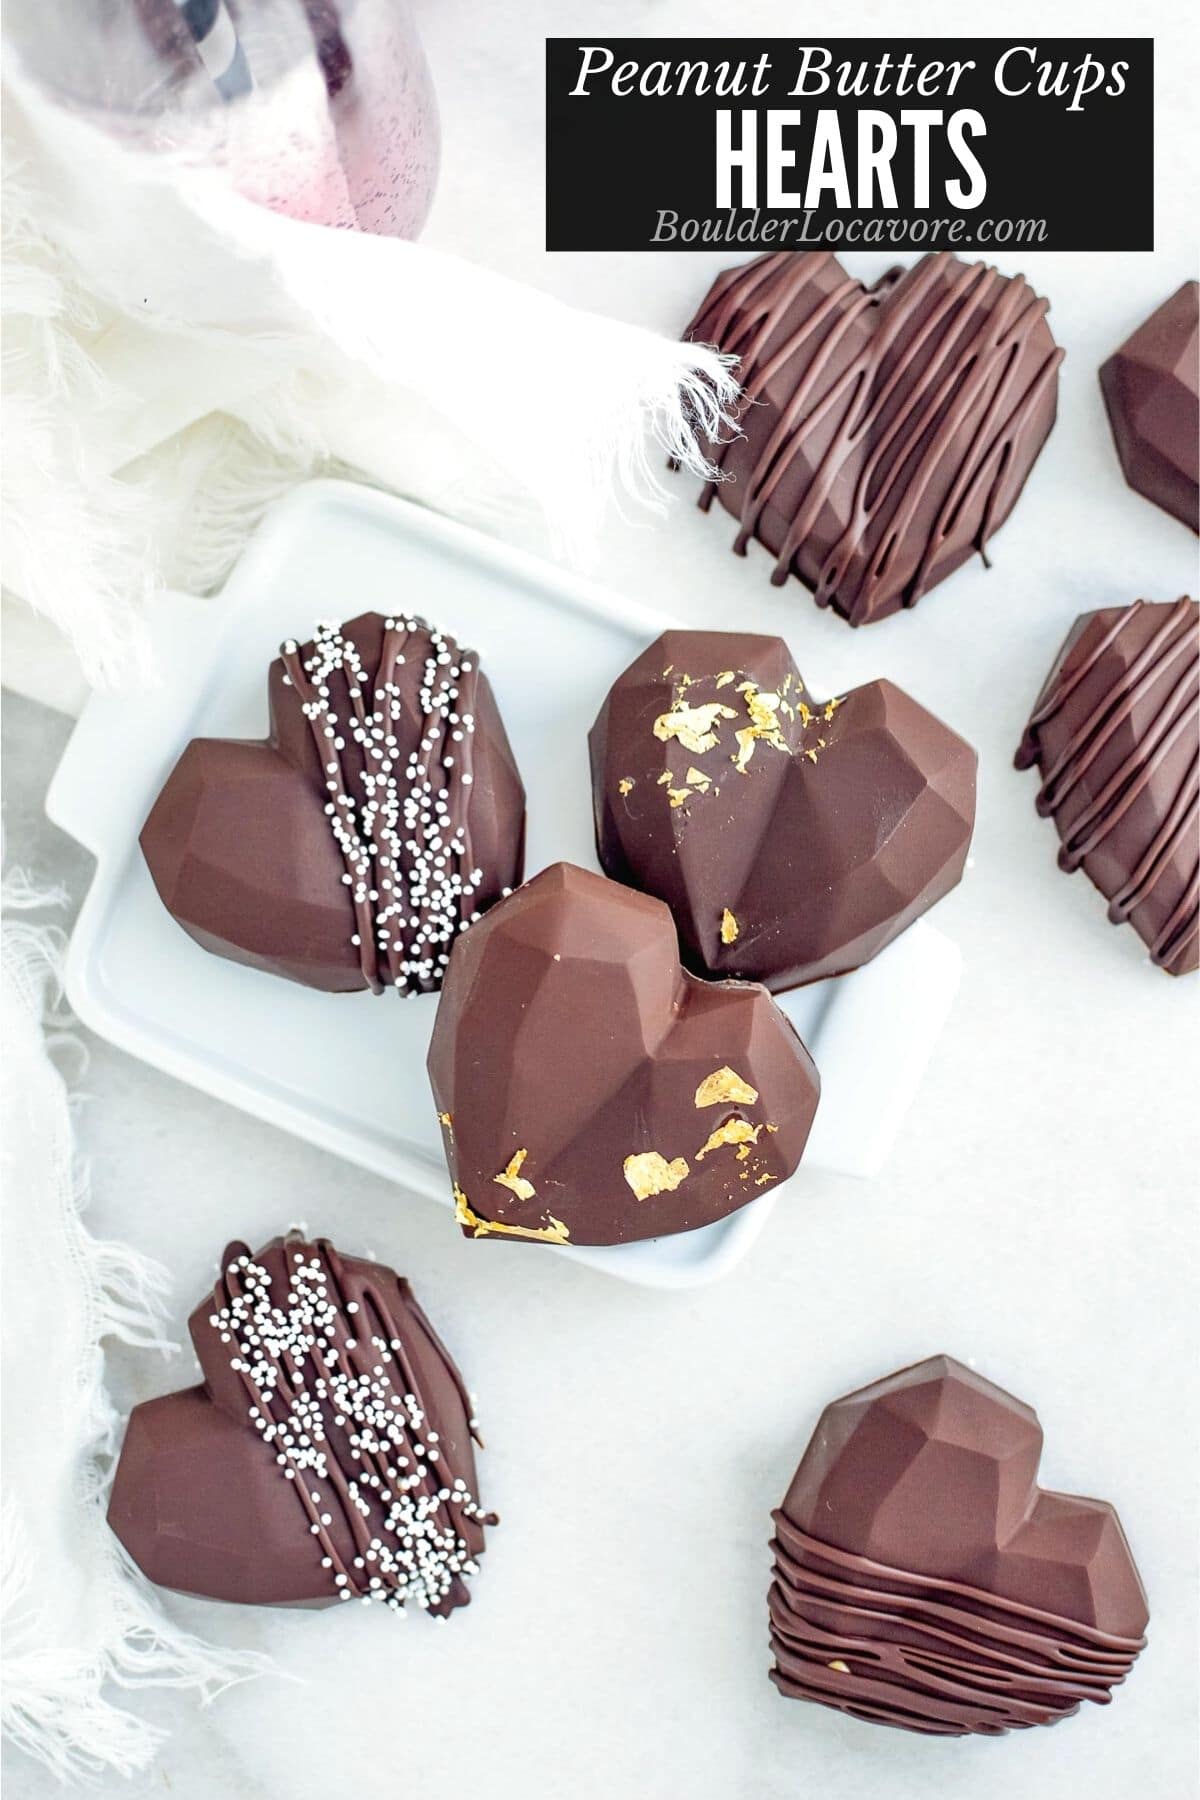 Peanut Butter Cups hearts title